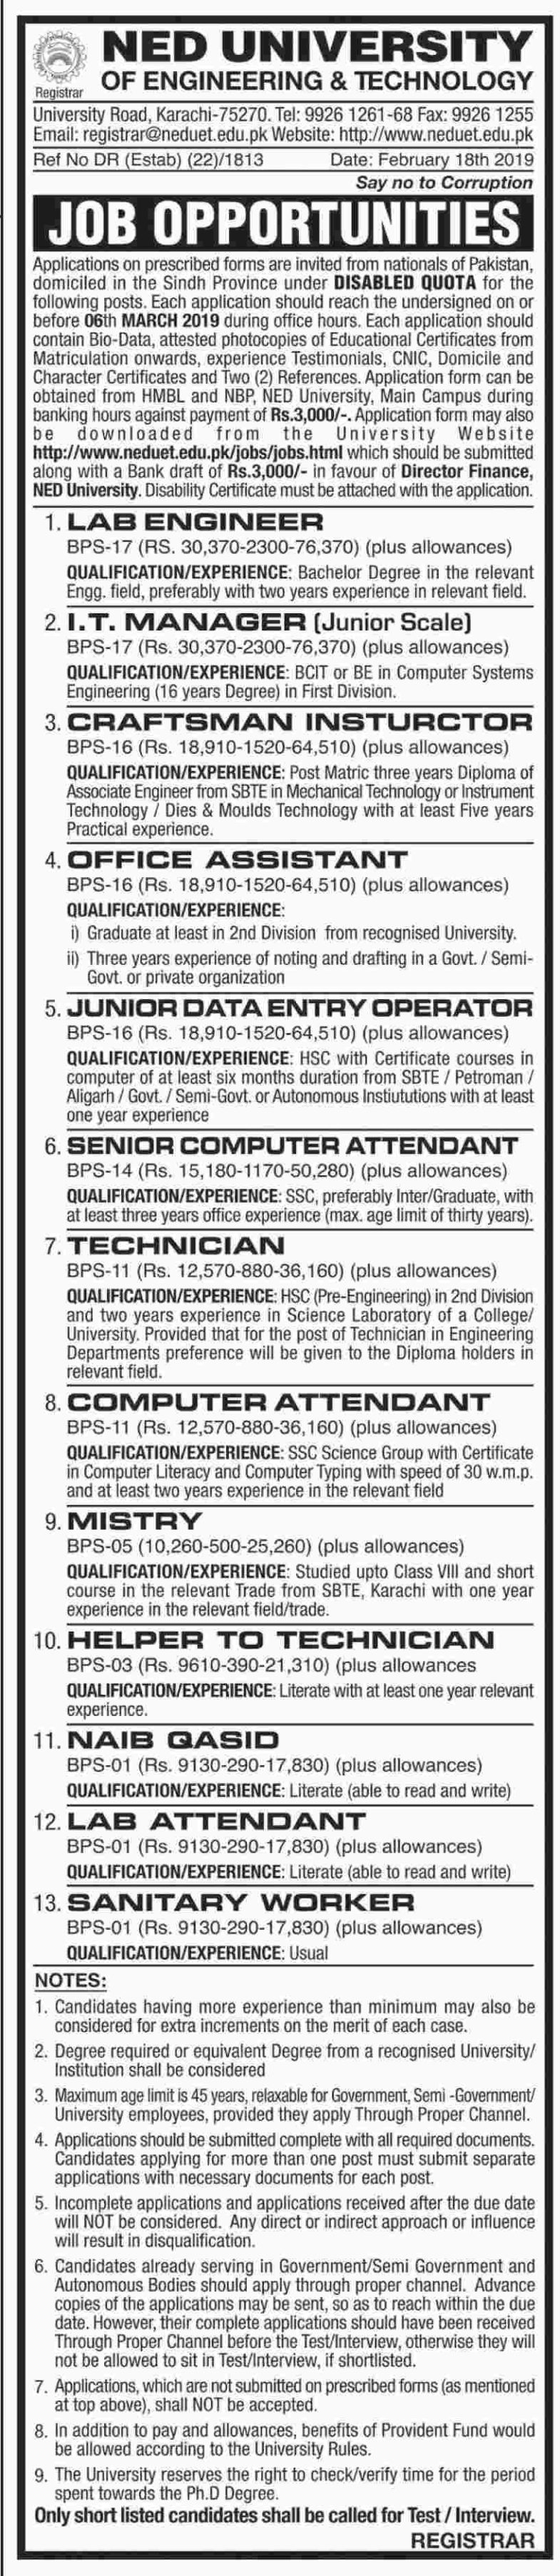 NED University of Engineering & Technology Jobs 2019 for 13+ IT, Admin, Lab Engineer, Data Entry Operator, Instructor & Other Posts (Disable Quota)